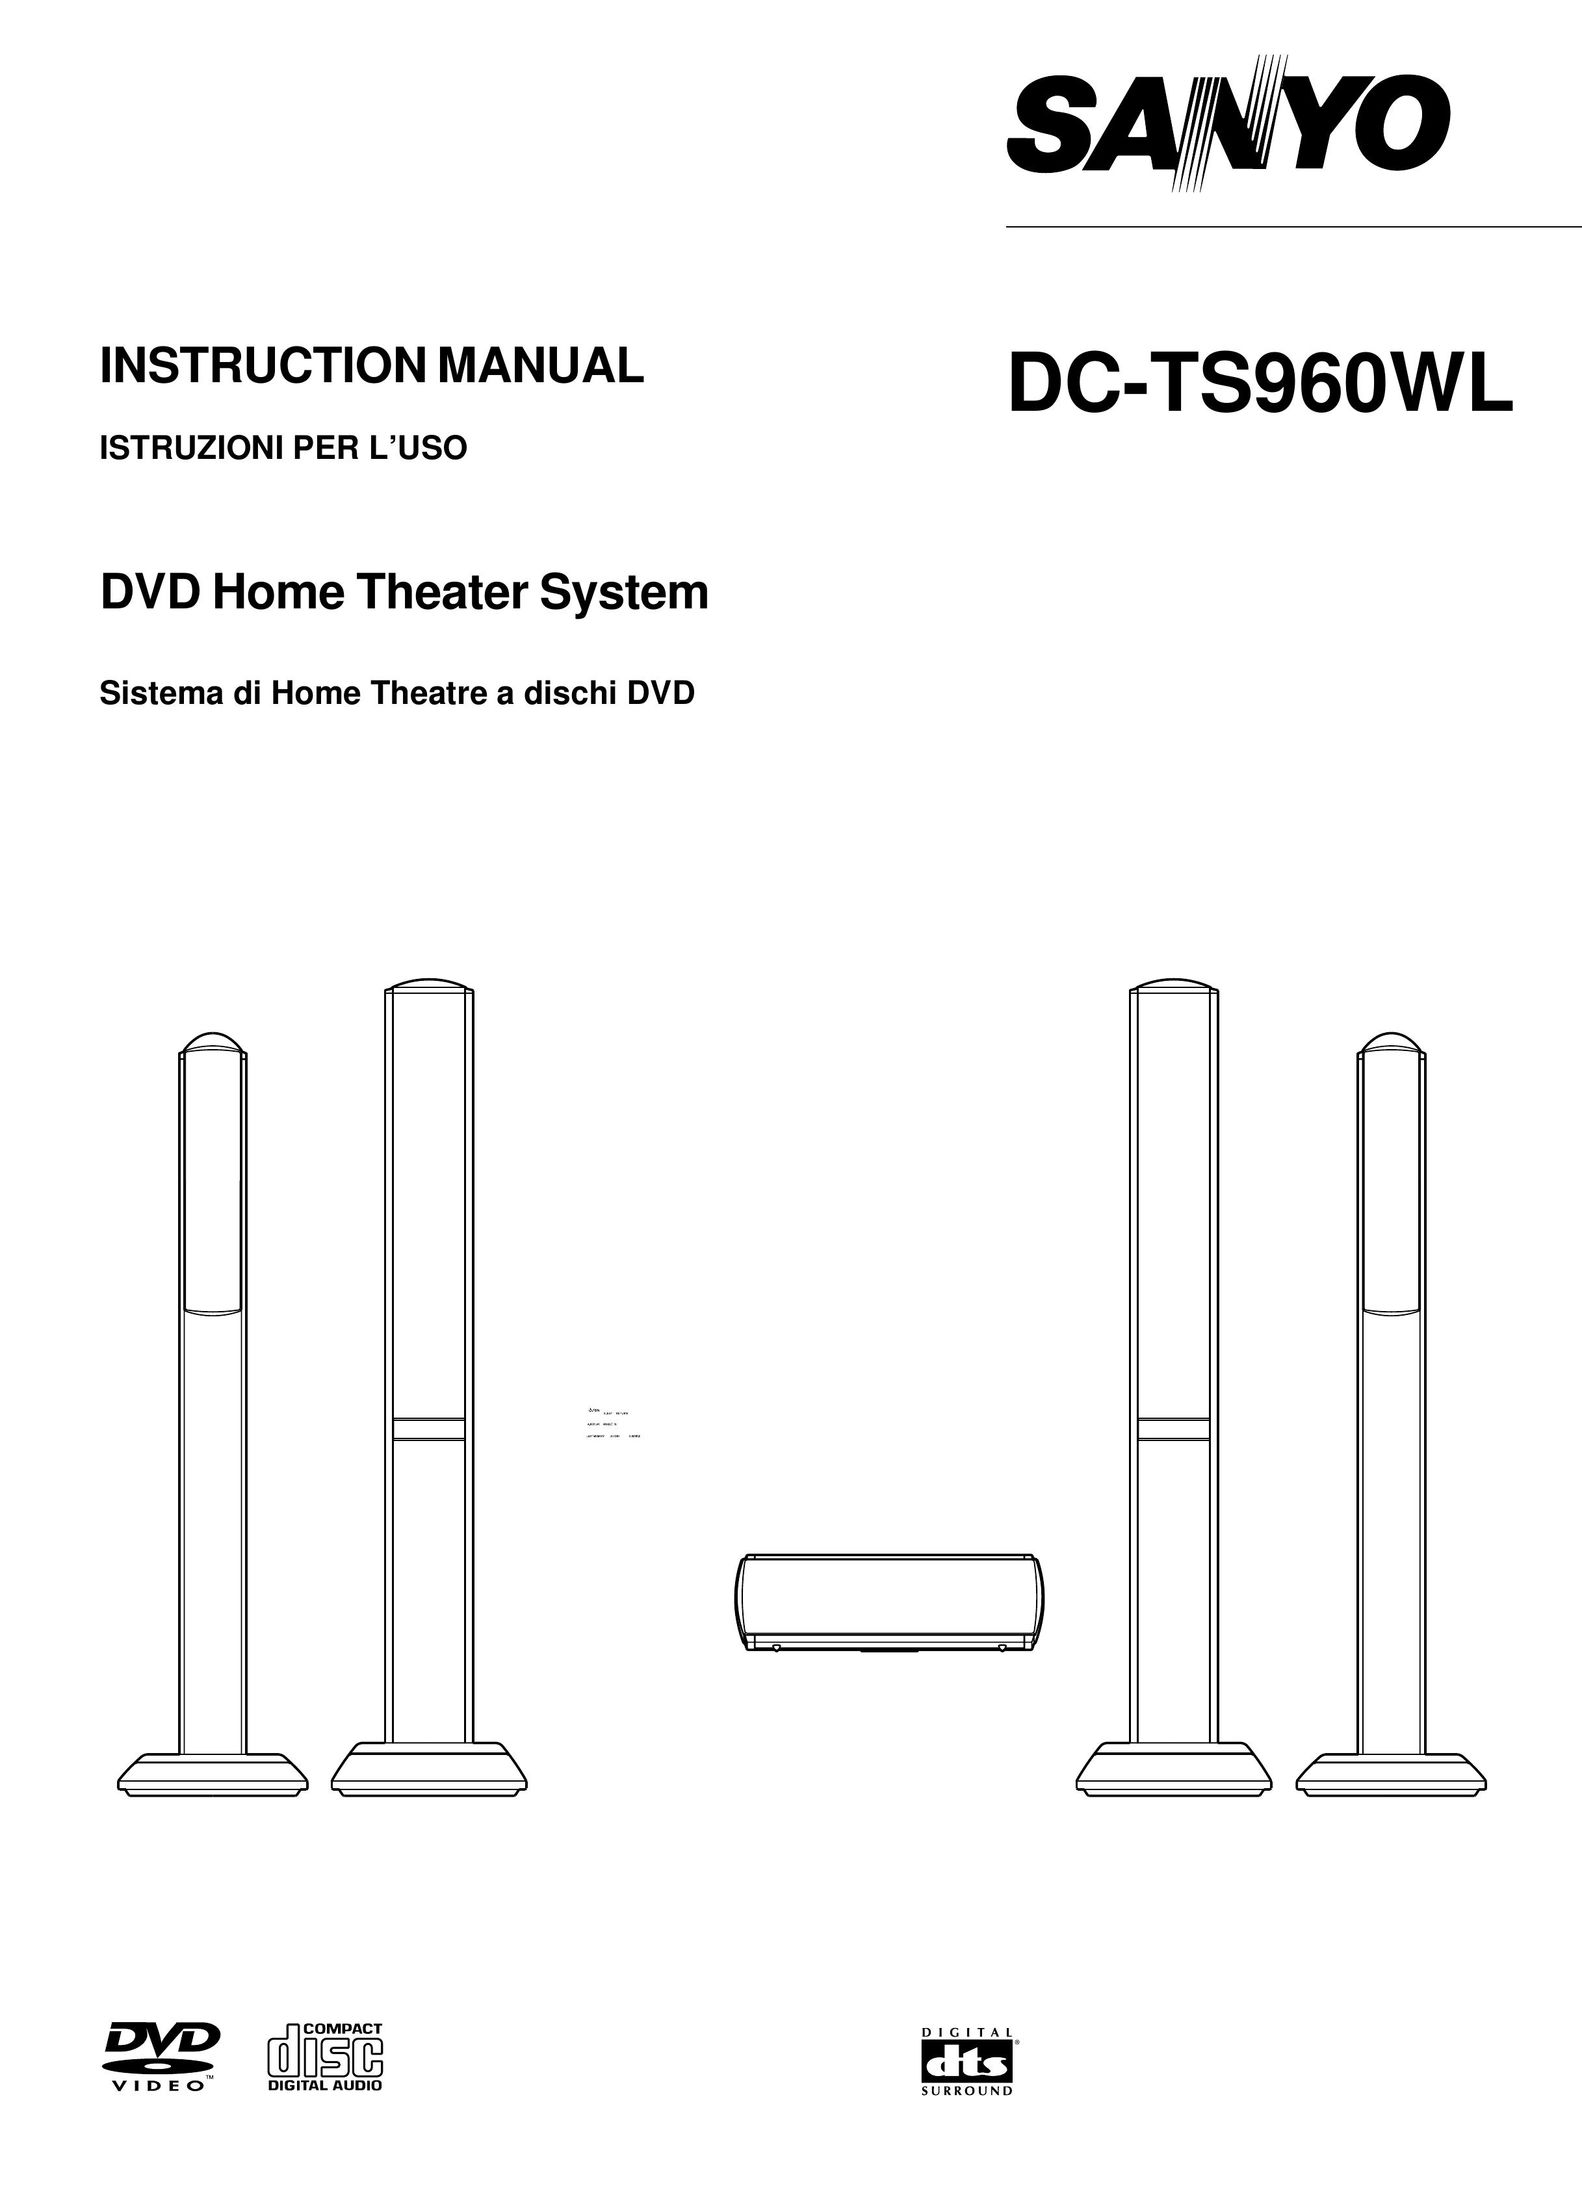 Fisher DC-TS960WL Home Theater System User Manual